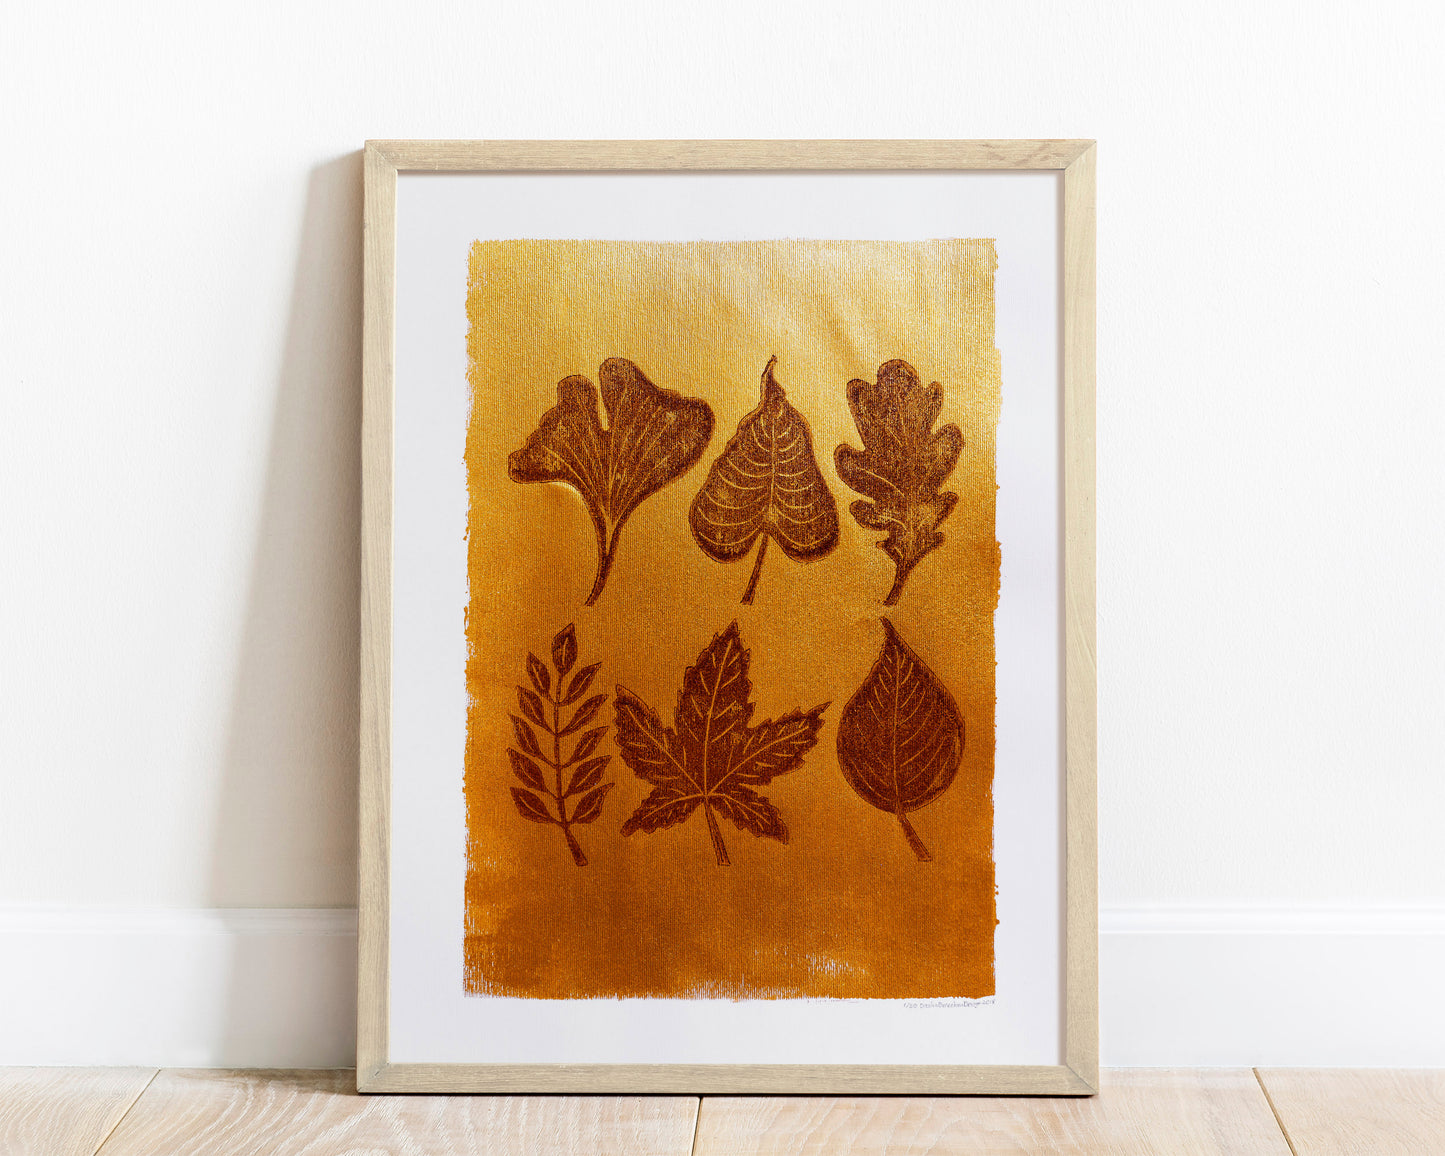 Gold and brown fall leaves Linocut print 12x16in for New home gift UNFRAMED / gold acrylic ink, oil ink, lino print, linogravure, autumn wall art, printmaking, handmade art, Nature lover gift, simple artwork, original artwork, houswarming gift, living room, bedroom, modern kitchen decor